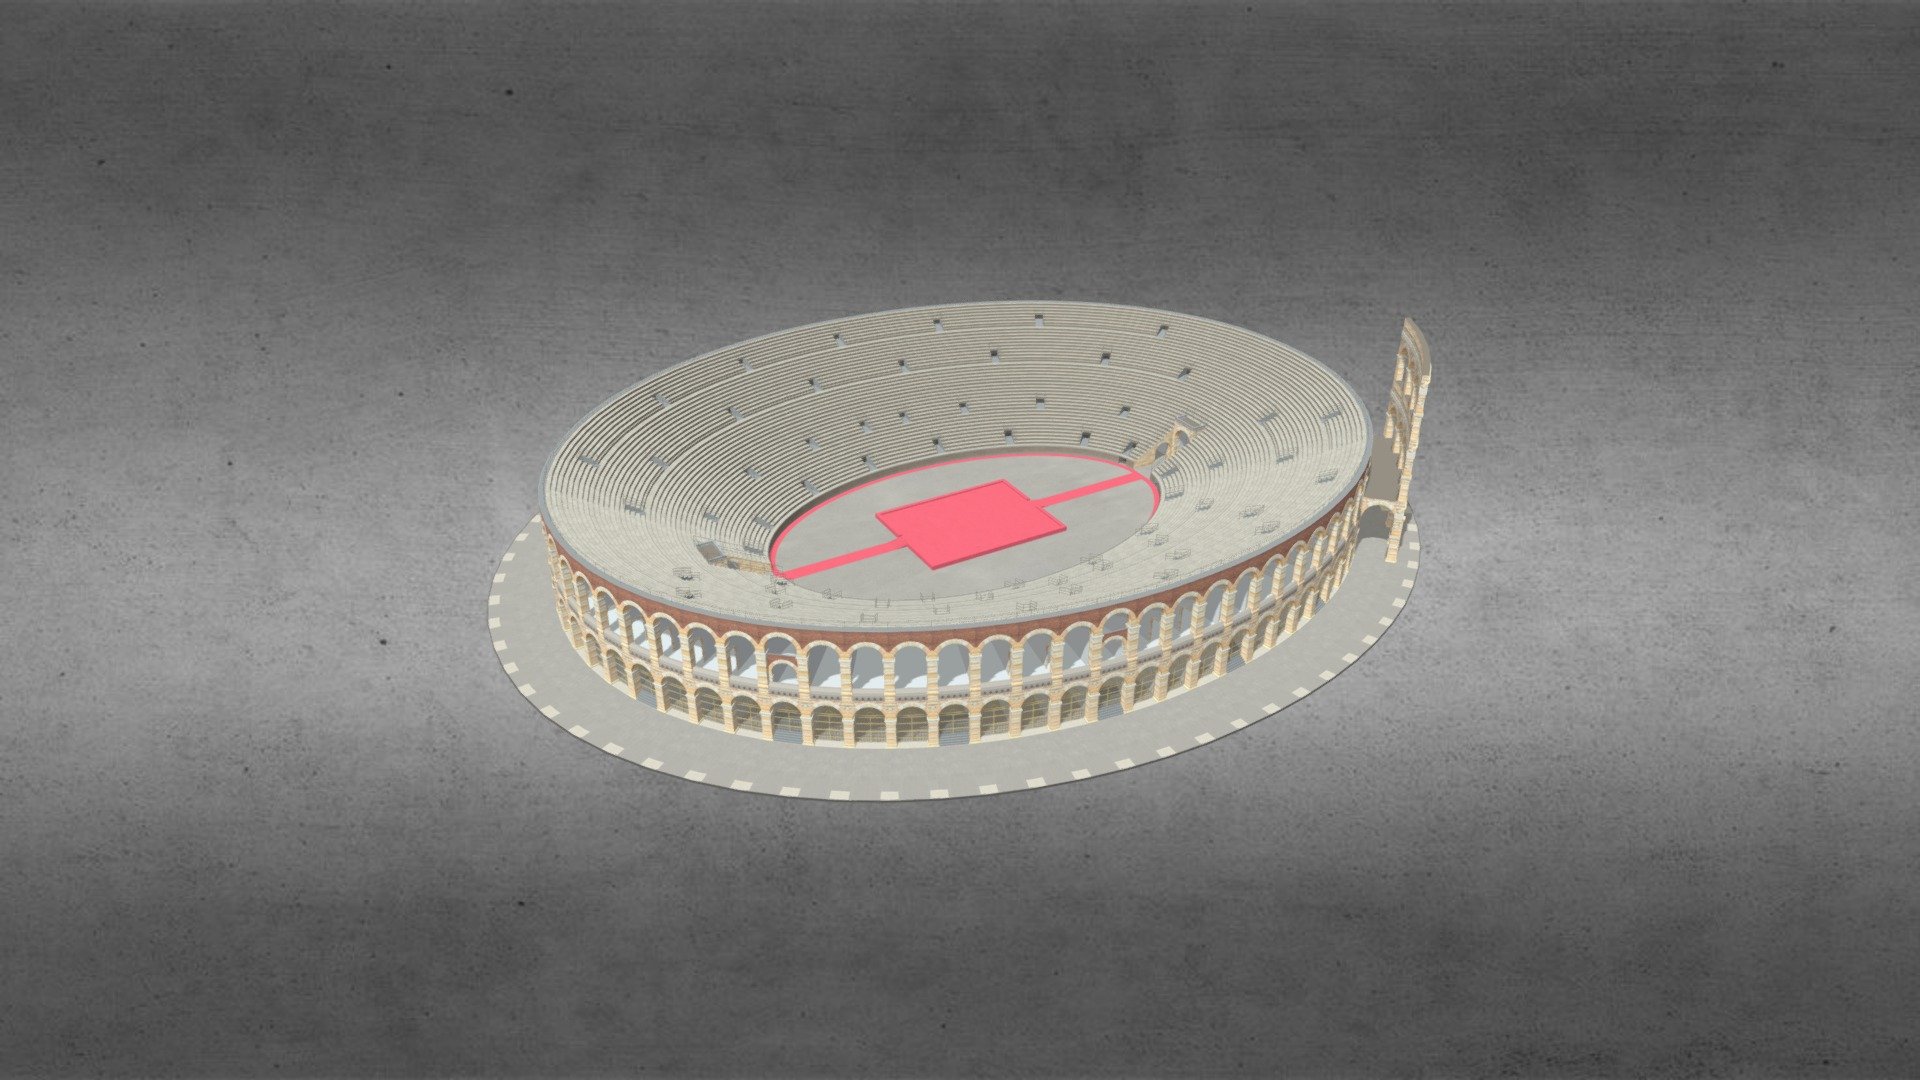 Verona Arena Roman Amphitheatre Italy
Originally created with 3ds Max 2015 and rendered in V-Ray 3.0

Total Poly Counts:
Poly Count = 132951
Vertex Count = 162307
Textures Formats:
- 03.jpg texture (2048px x 2048px) - Verona Arena Roman Amphitheatre Italy - 3D model by nuralam018 3d model